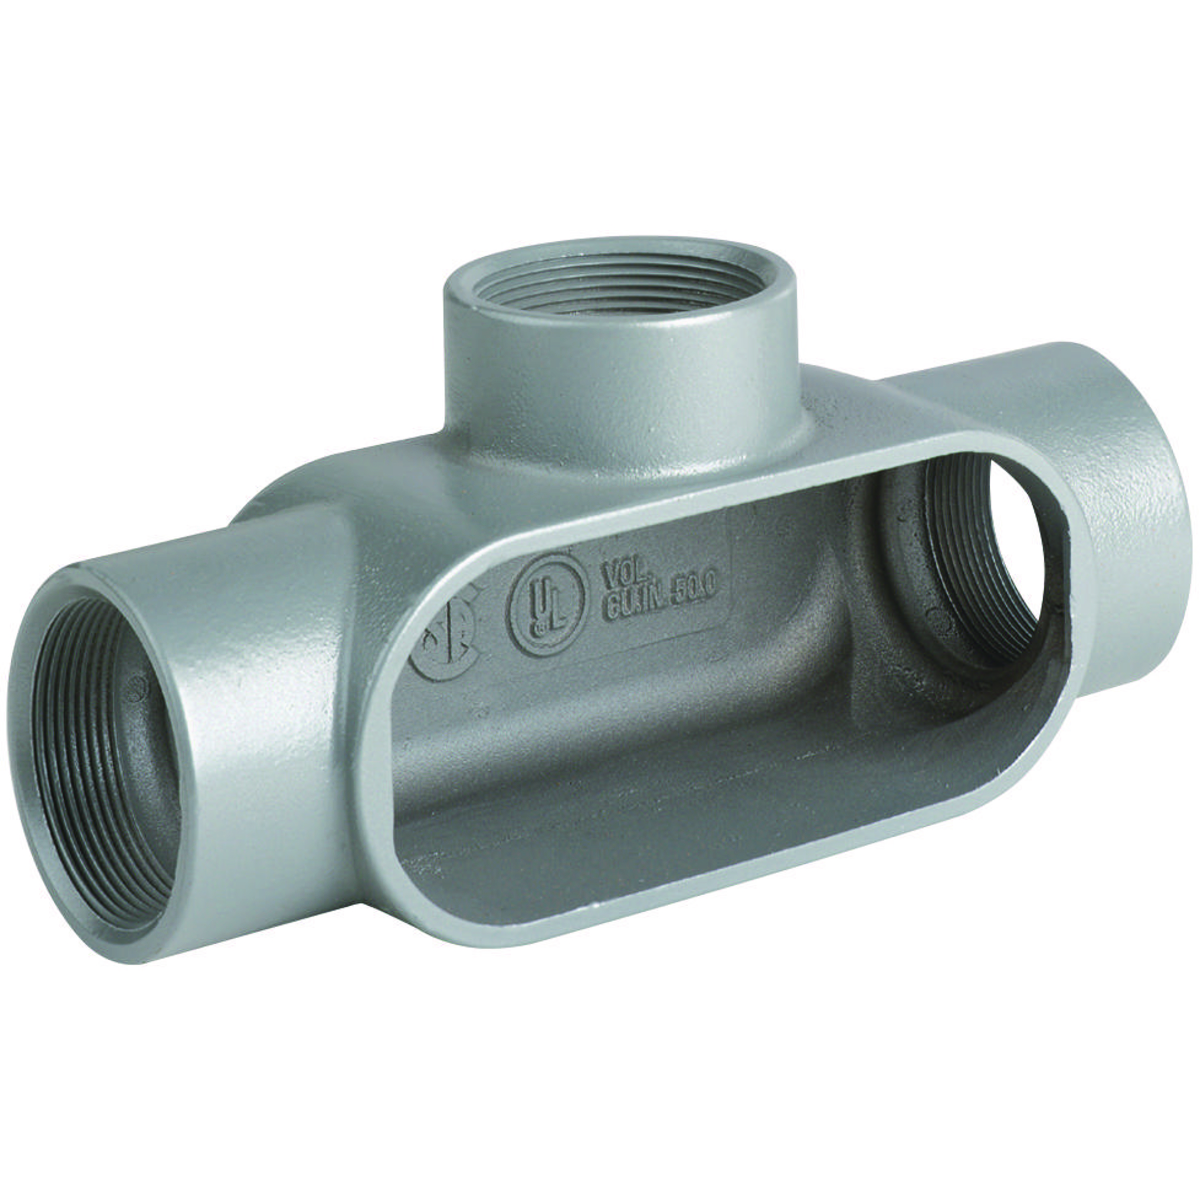 DURALOY 7 SERIES - IRON CONDUIT BODY - T TYPE - HUB SIZE 2-1/2 INCH -VOLUME 134.0 CUBIC INCHES